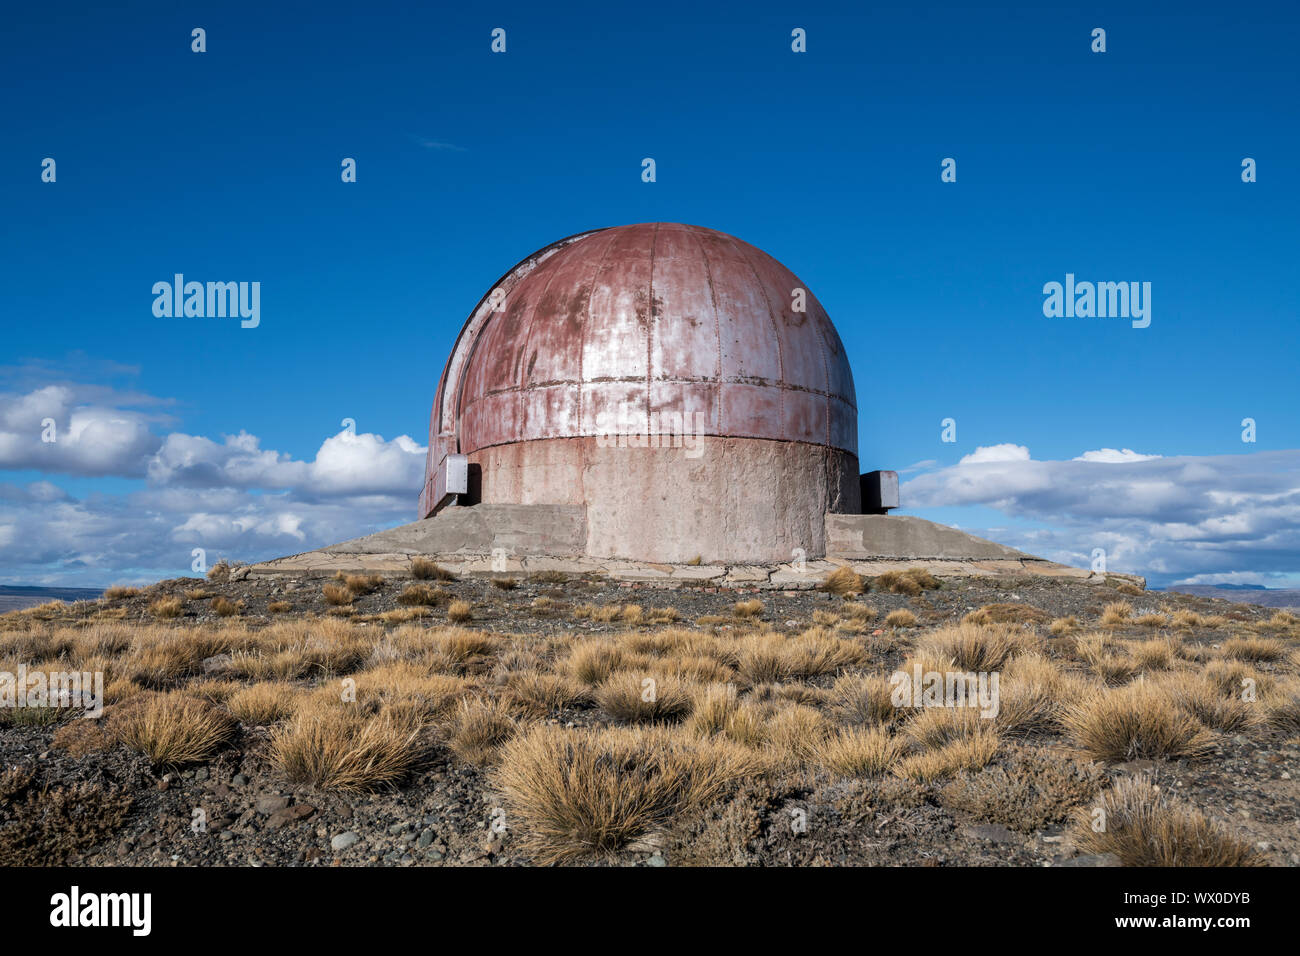 Old abandoned Observatory in a remote landscape, Patagonia, Argentina, South America Stock Photo